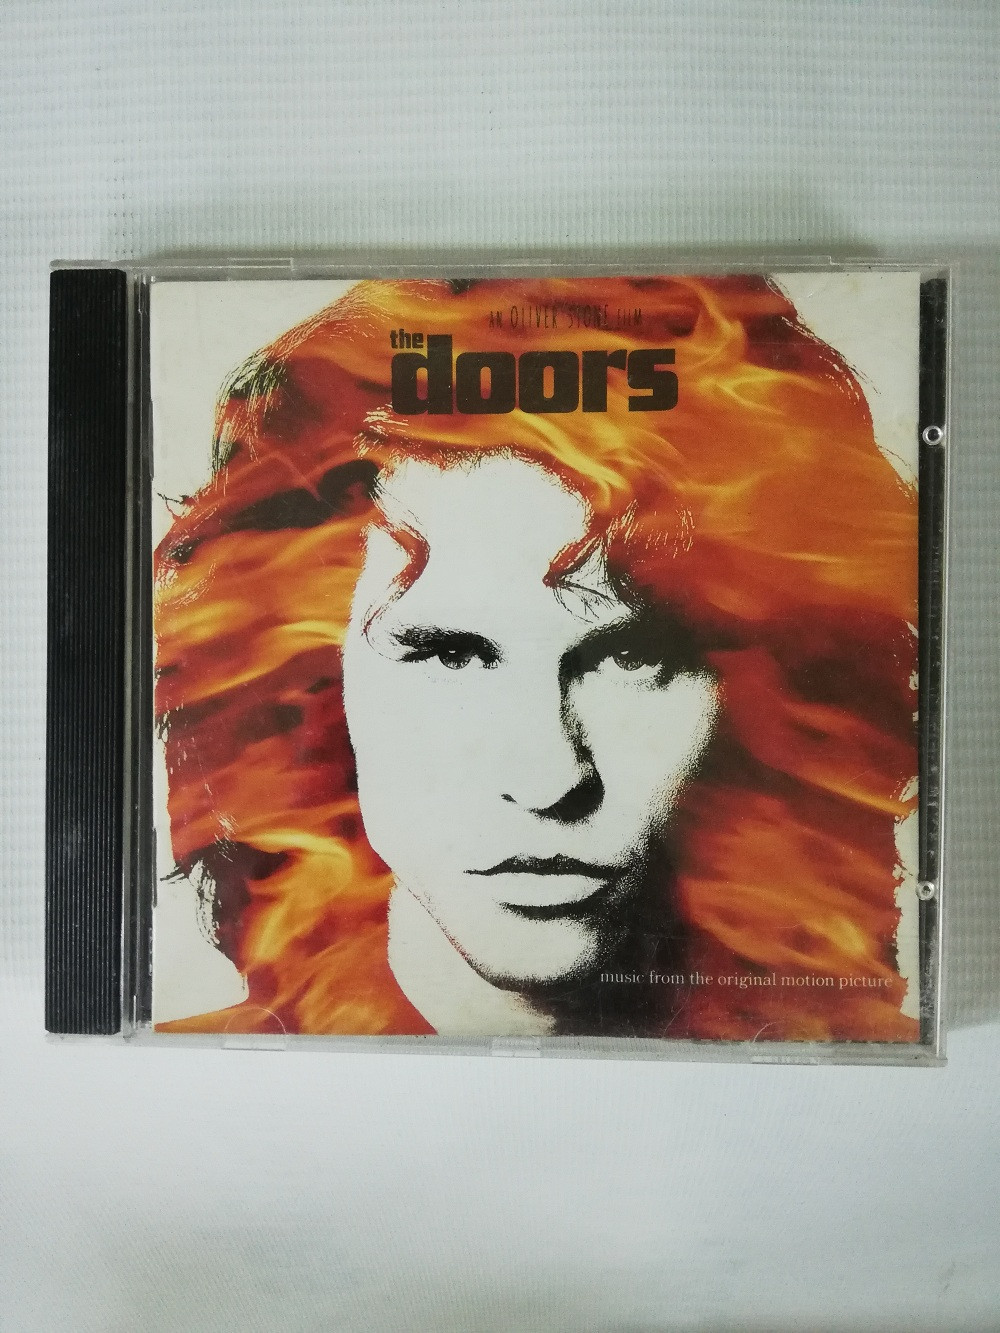 Imagen CD THE DOORS - MUSIC FROM THE ORIGINAL MOTION PICTURE 1